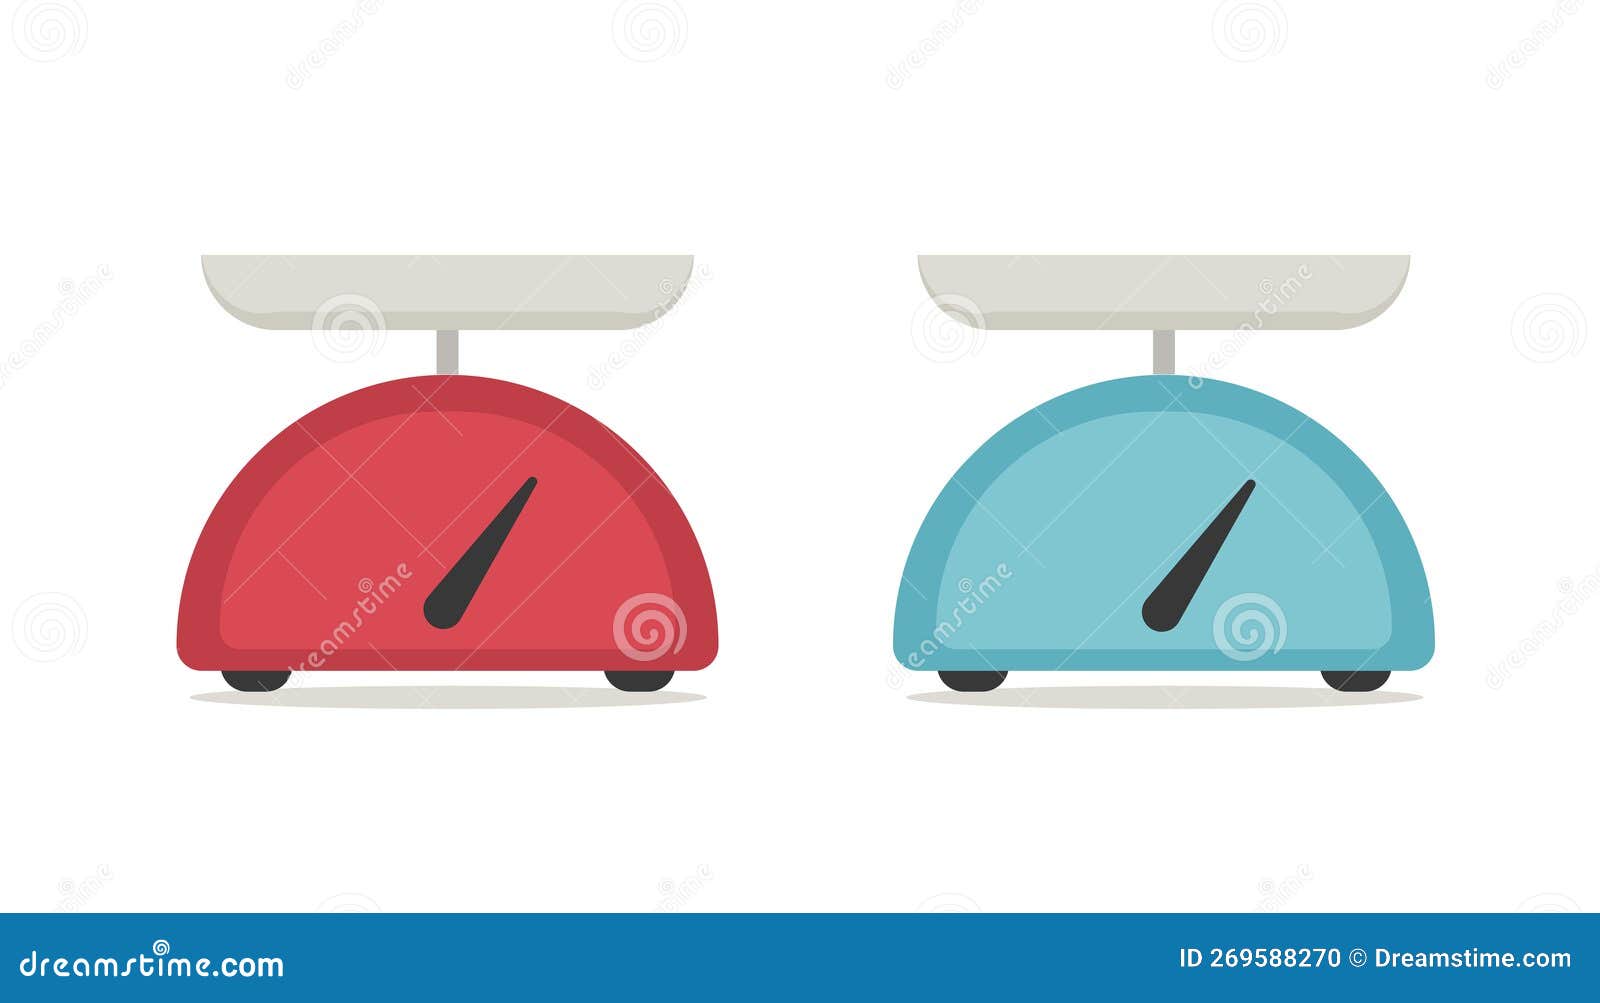 Cute Retro Weighing Scale with Sugary Food. Editable Clip art